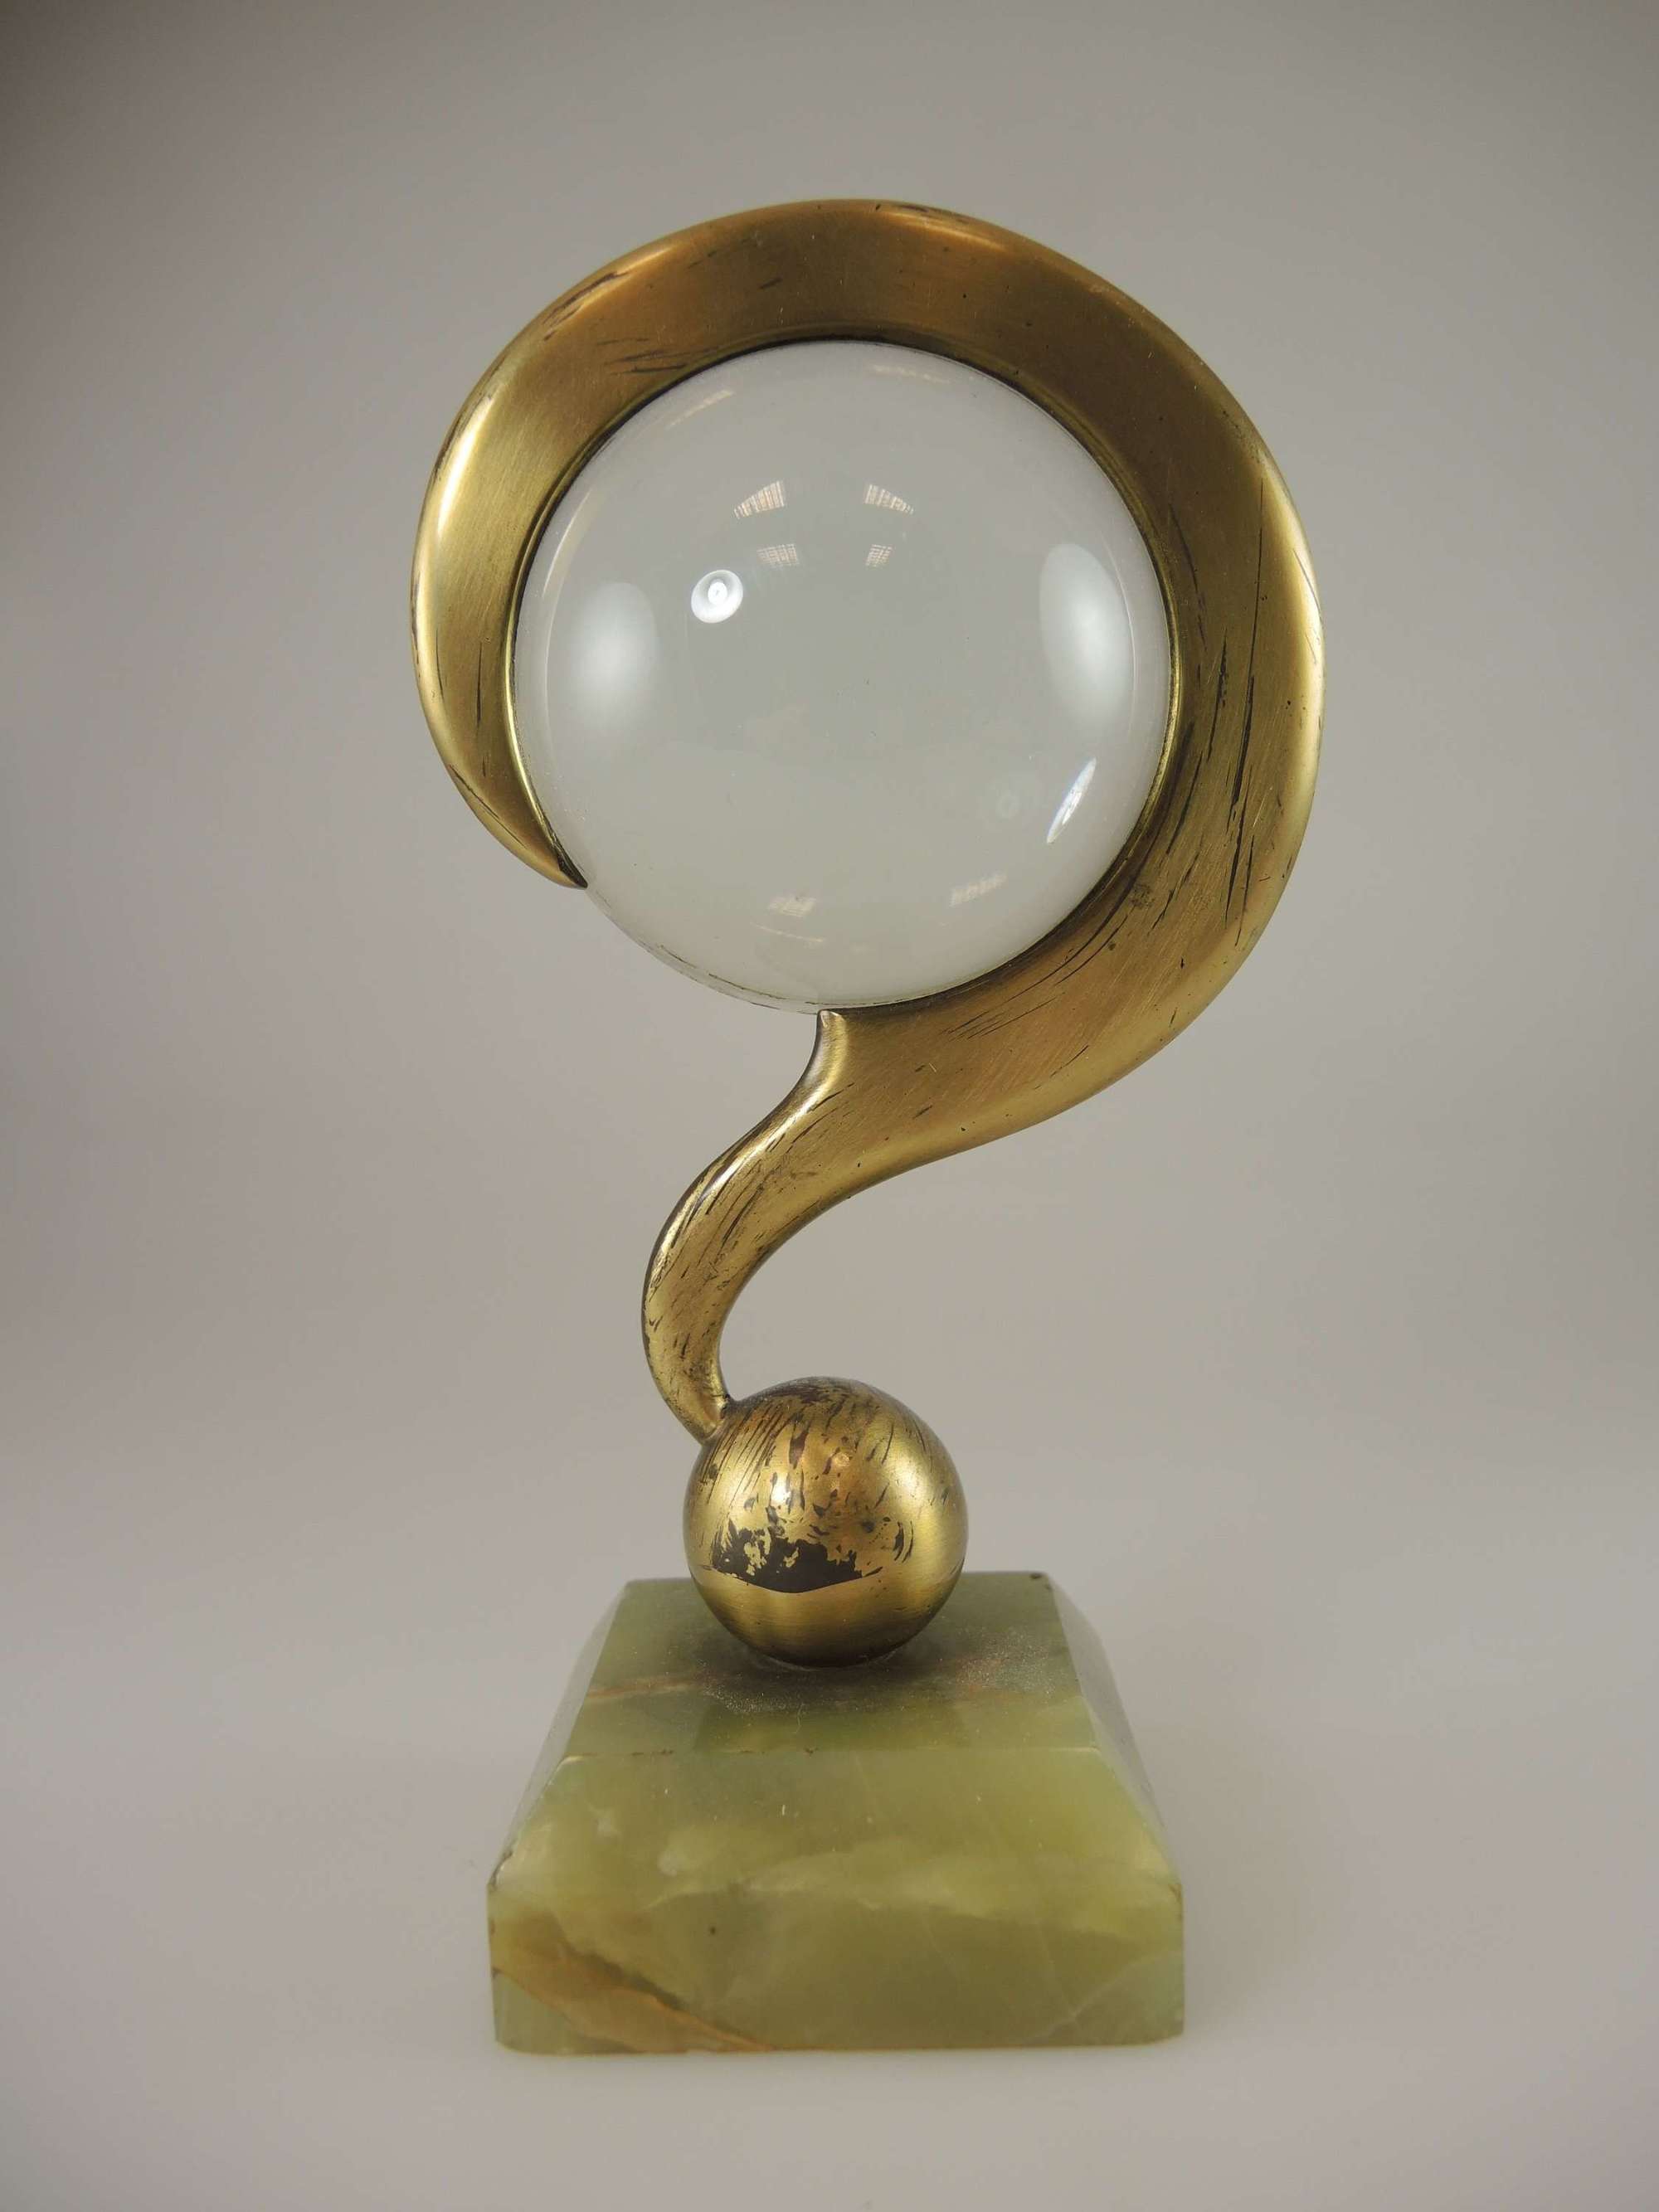 Unusual Gilt magnifying pocket watch stand c1890